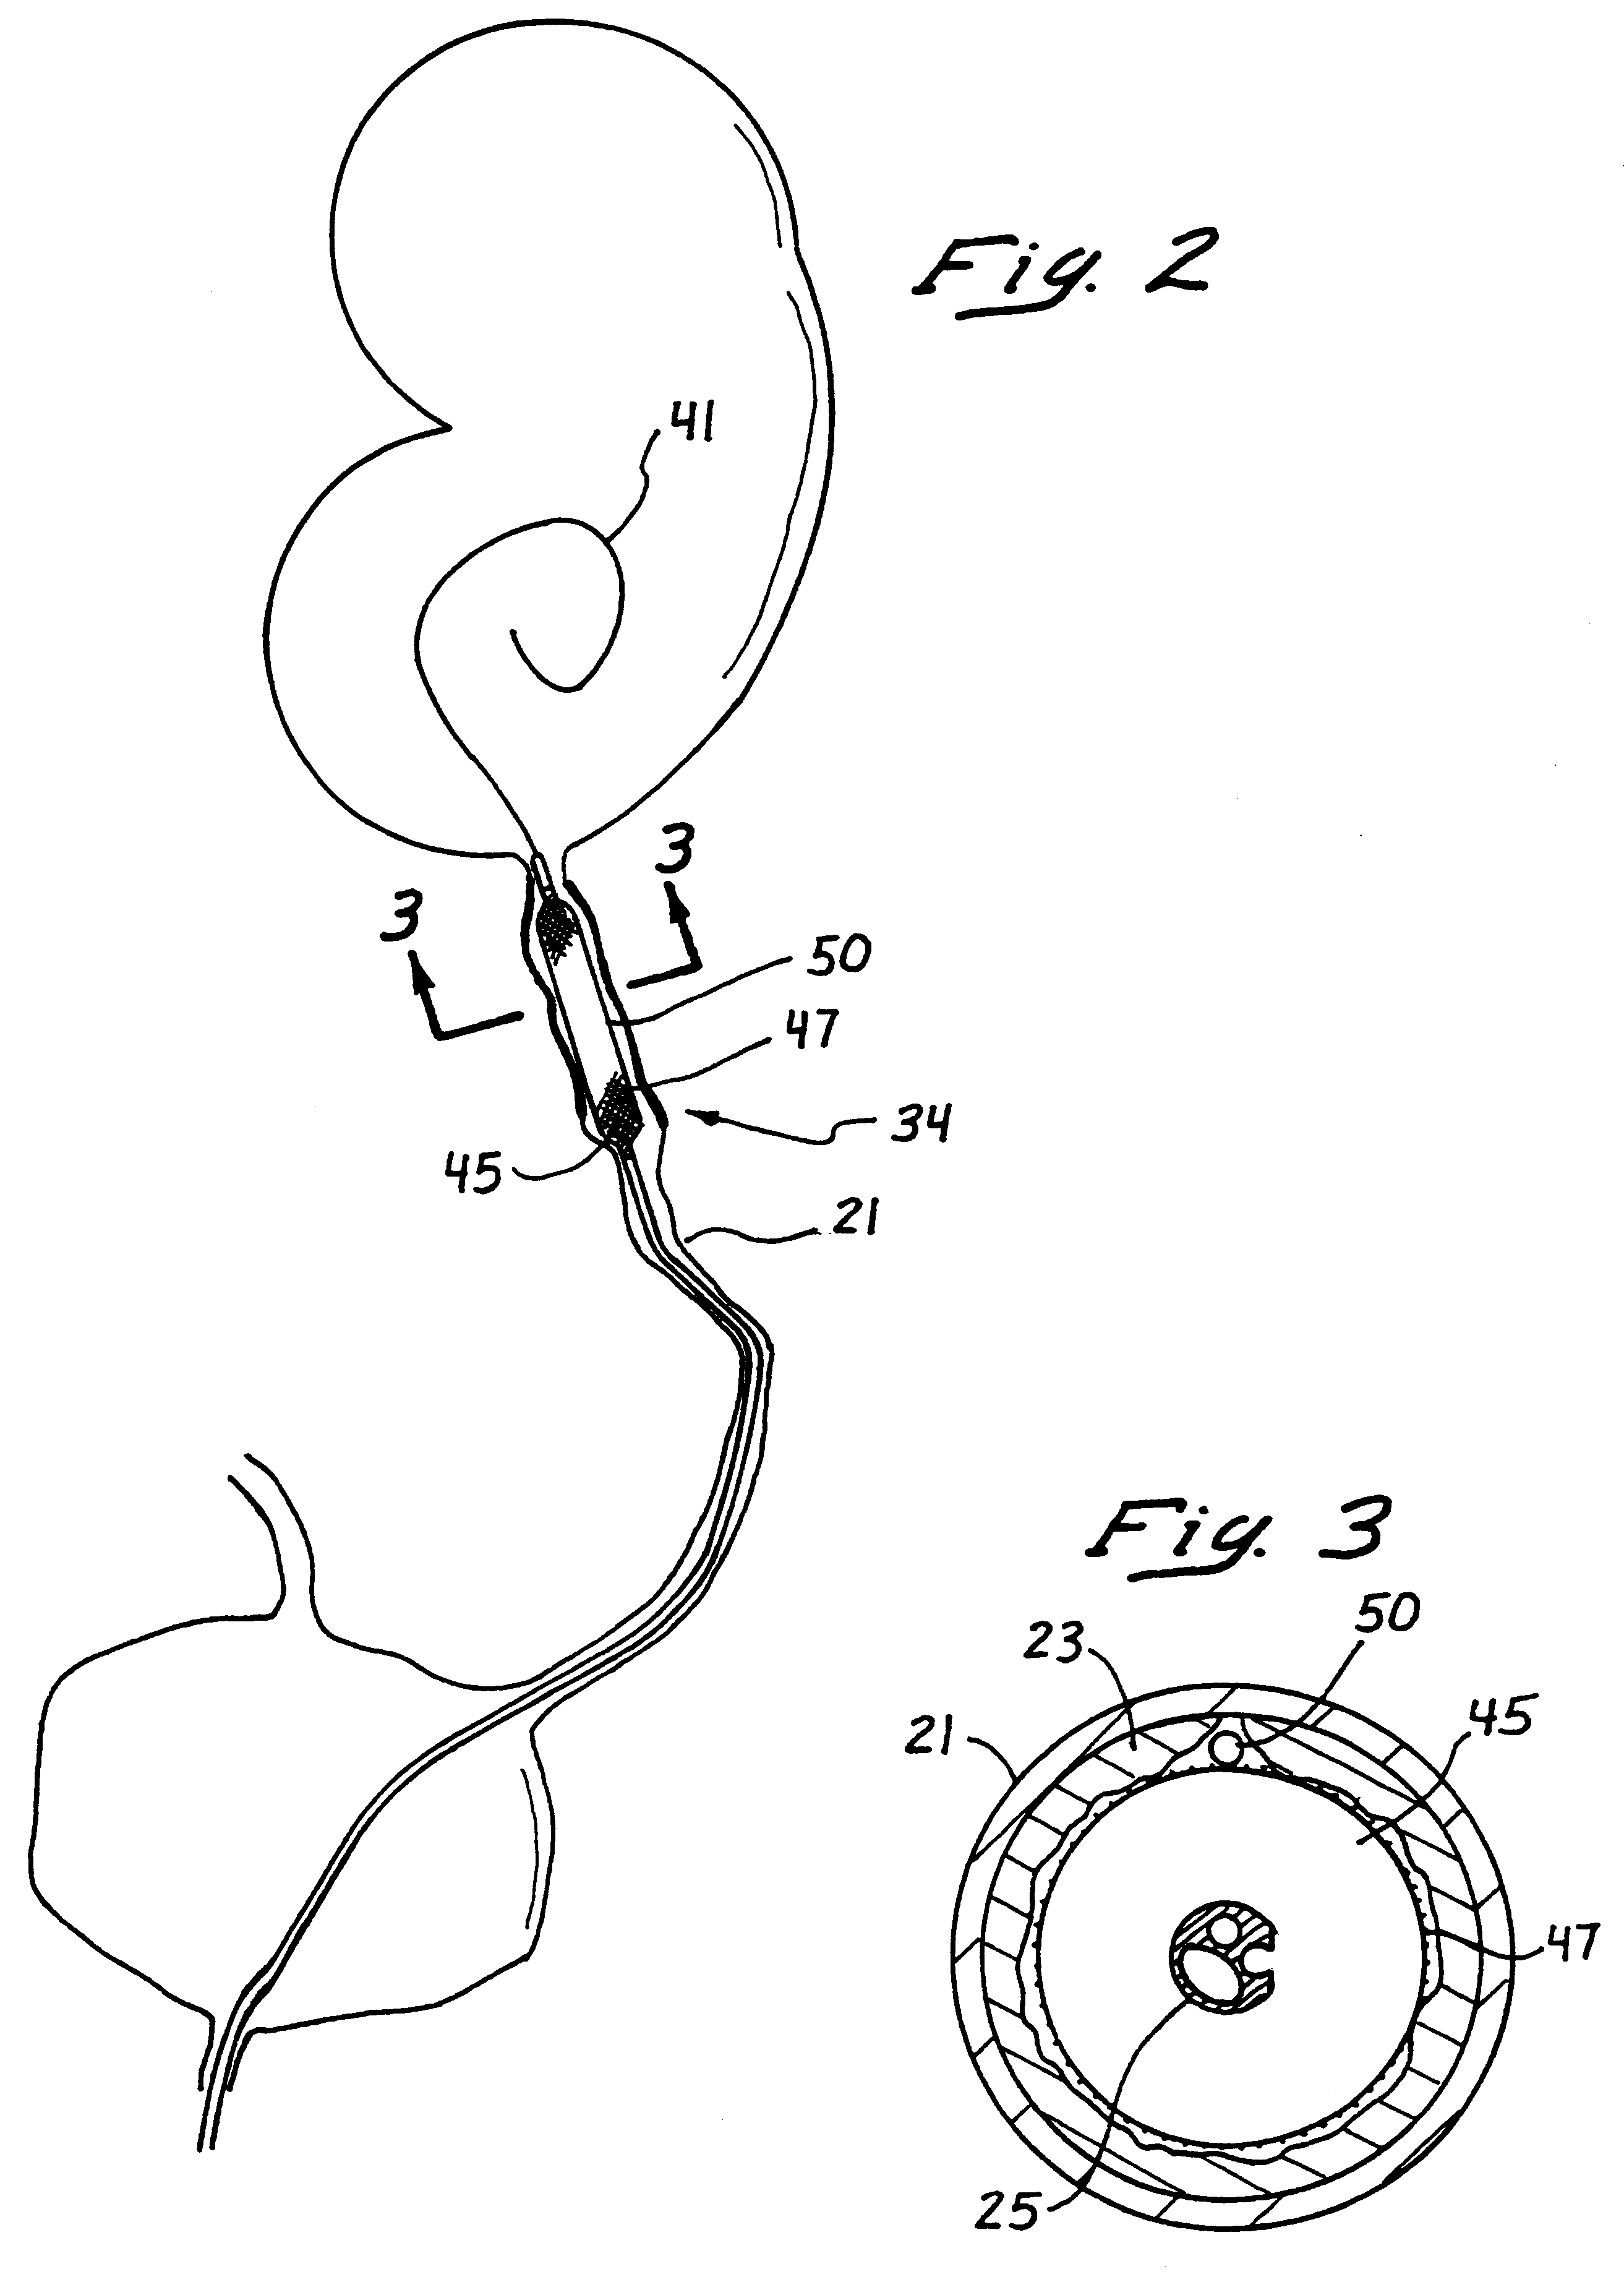 Electrosurgical catheter apparatus and method